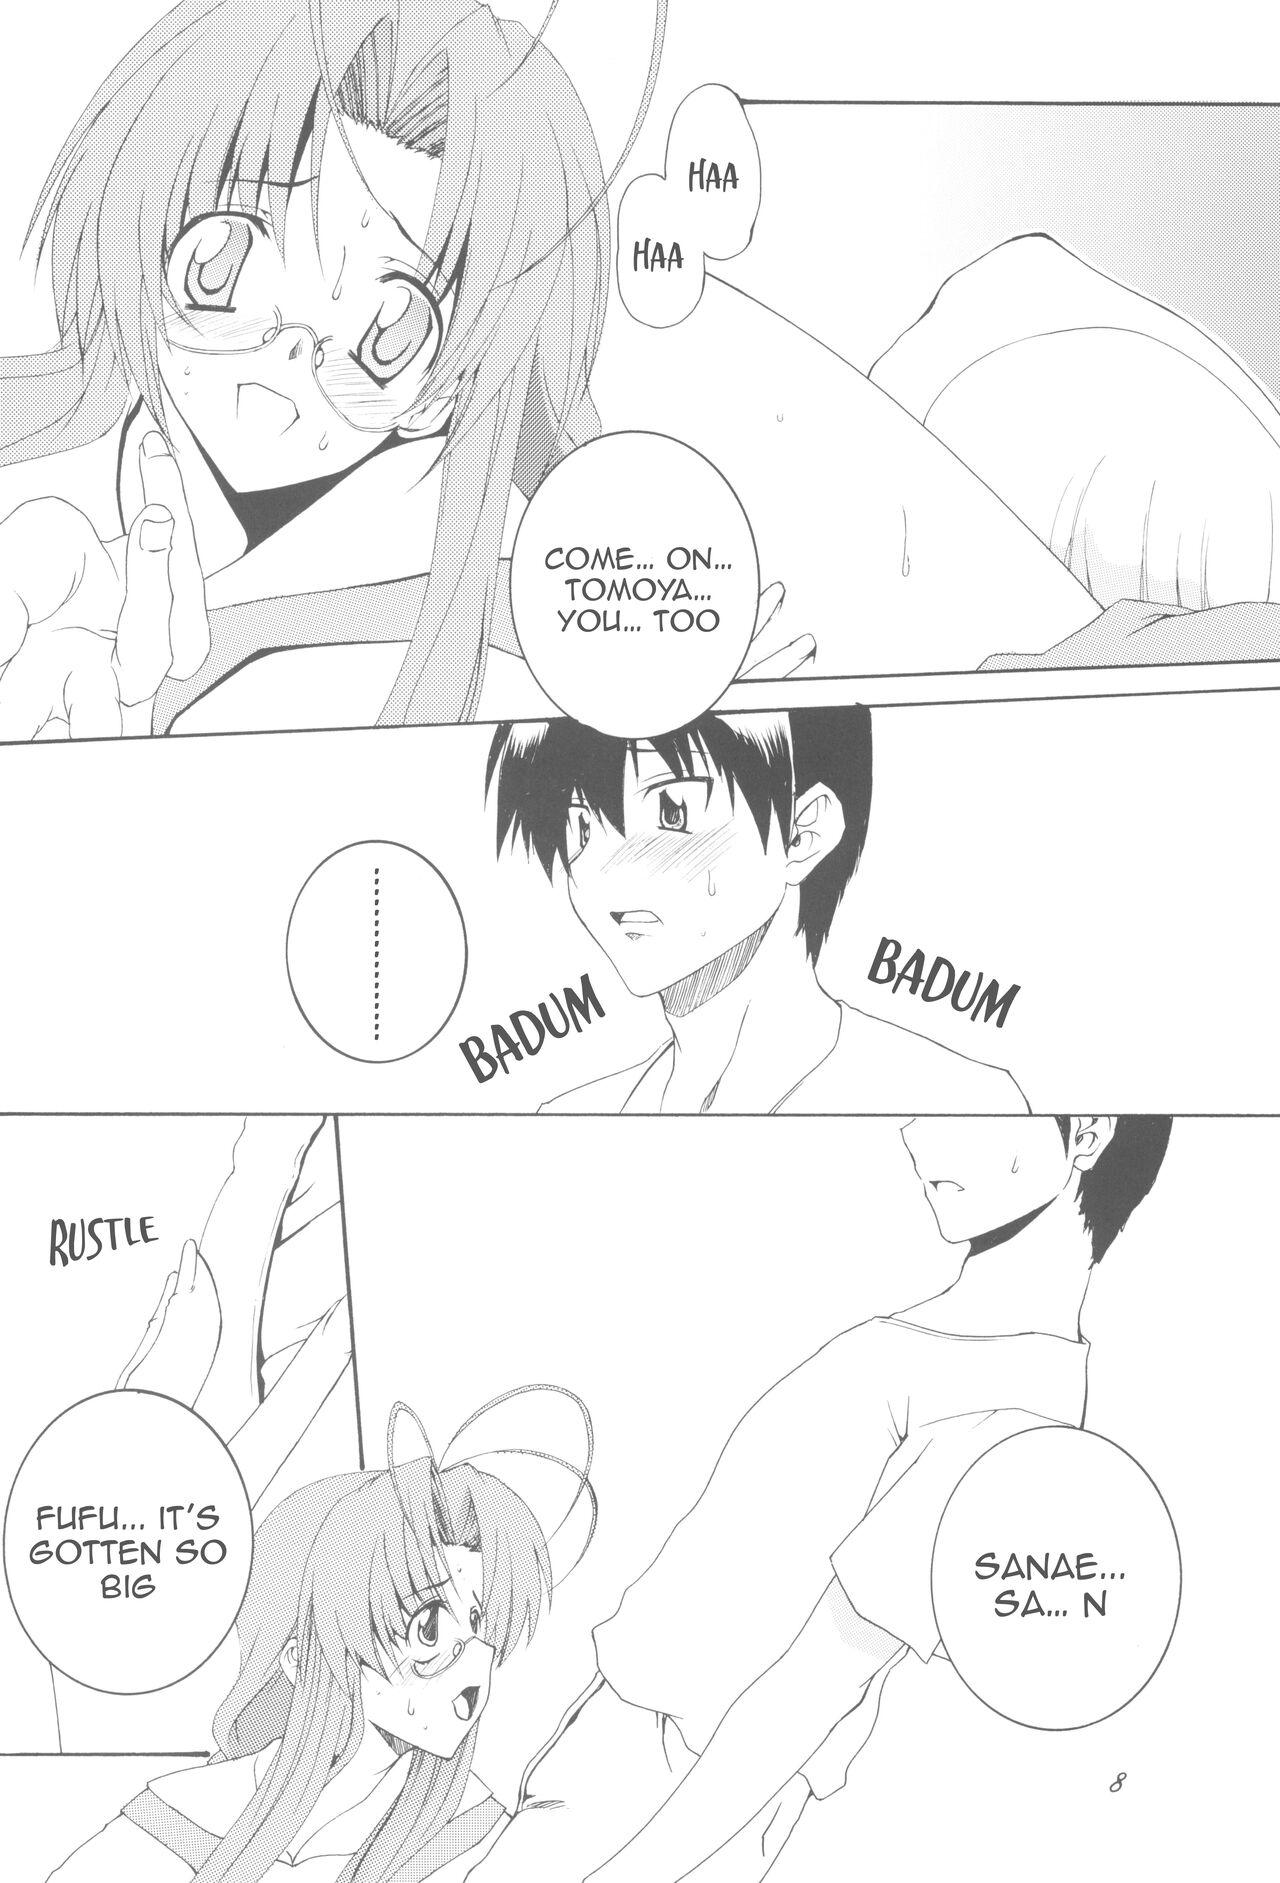 Stepsiblings Being Beauteous - Clannad Pica - Page 7